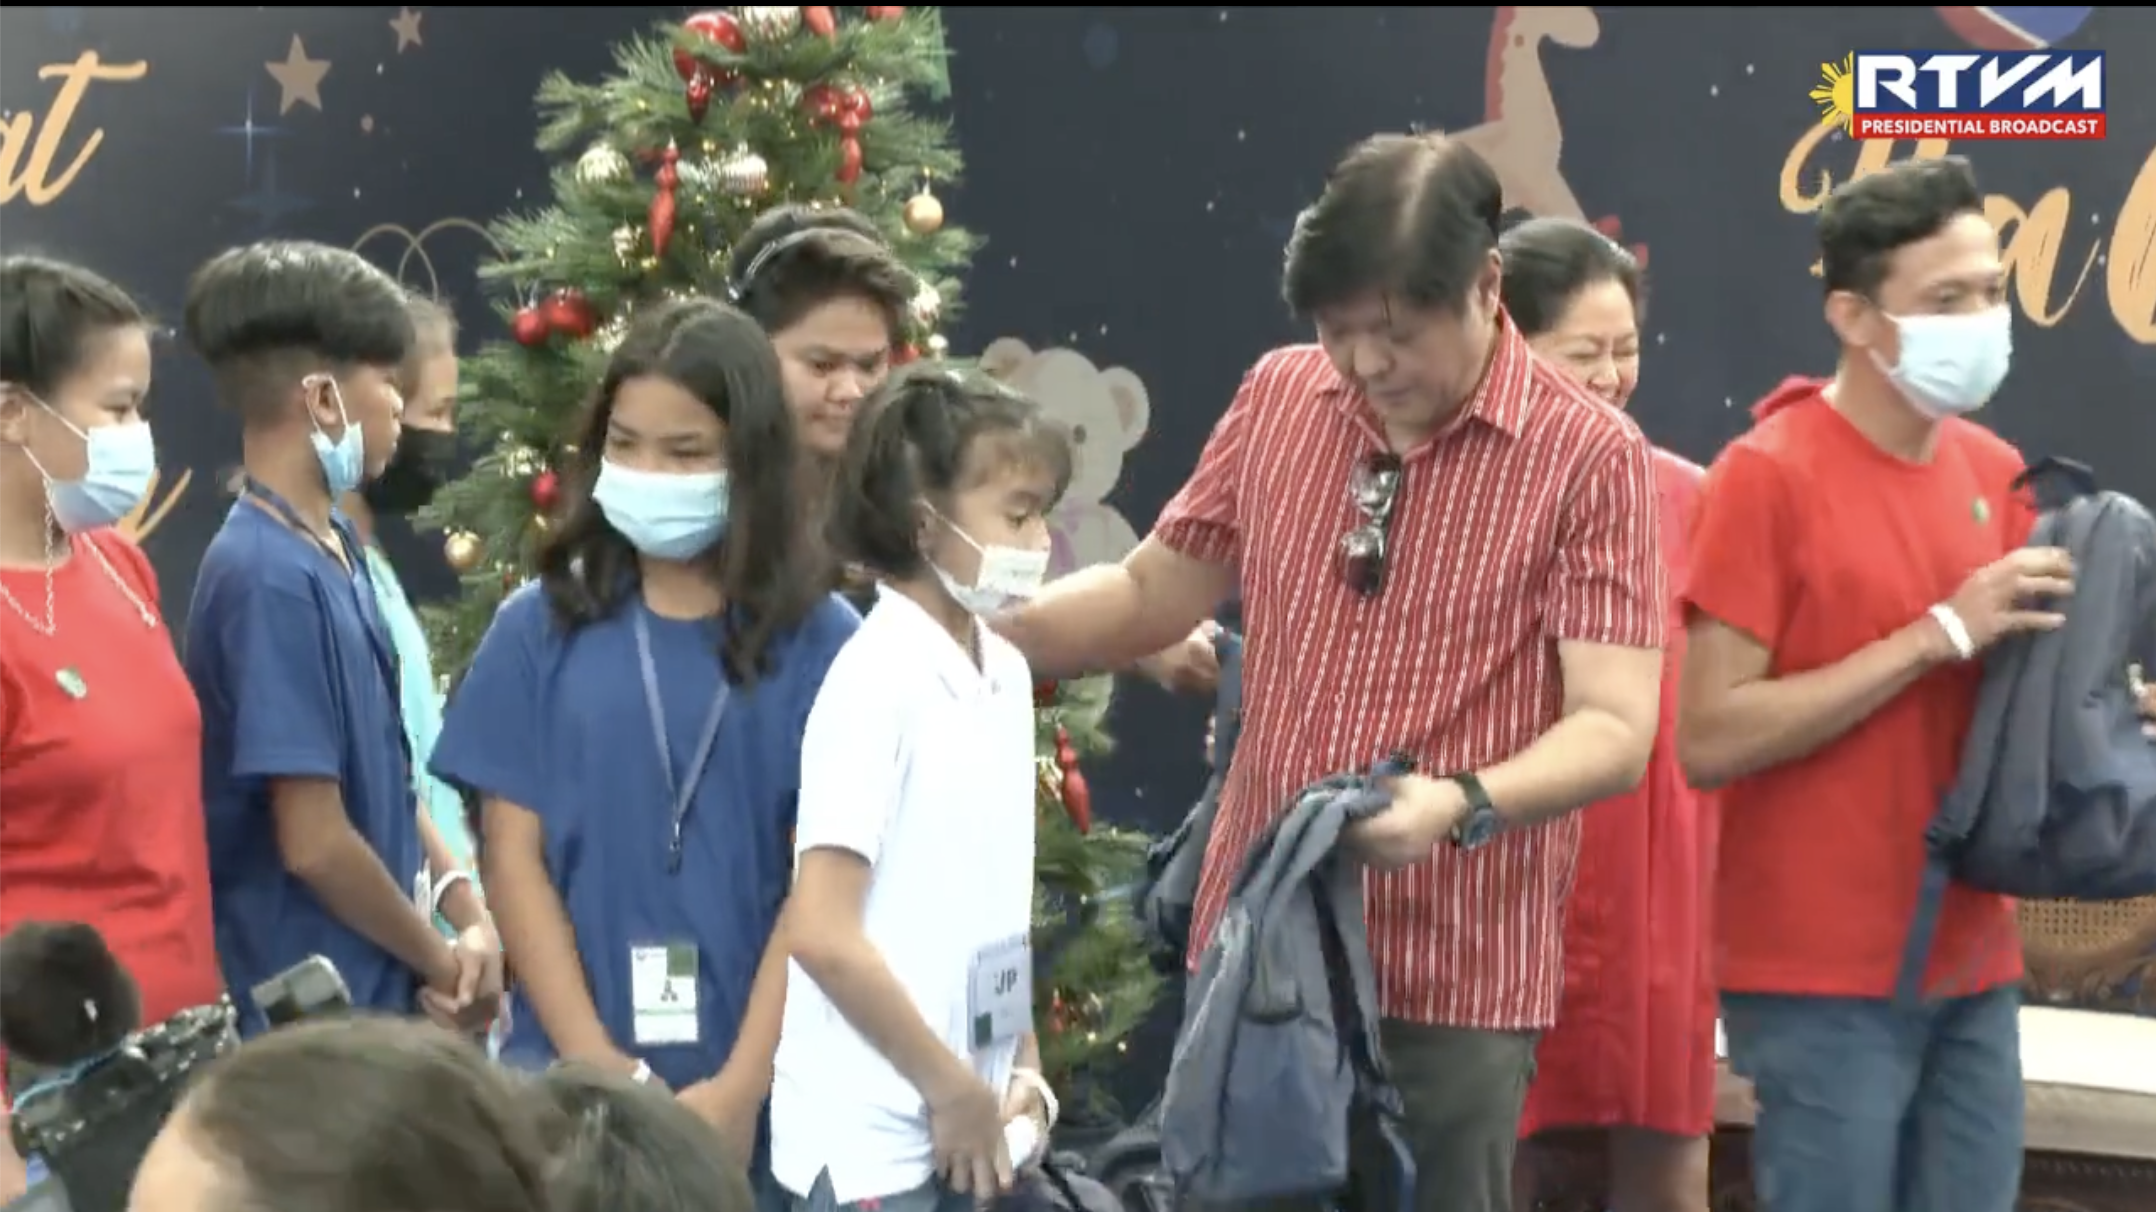 President Ferdinand Marcos Jr. led a gift-giving event and Christmas celebration right in front of Malacañang on Sunday.